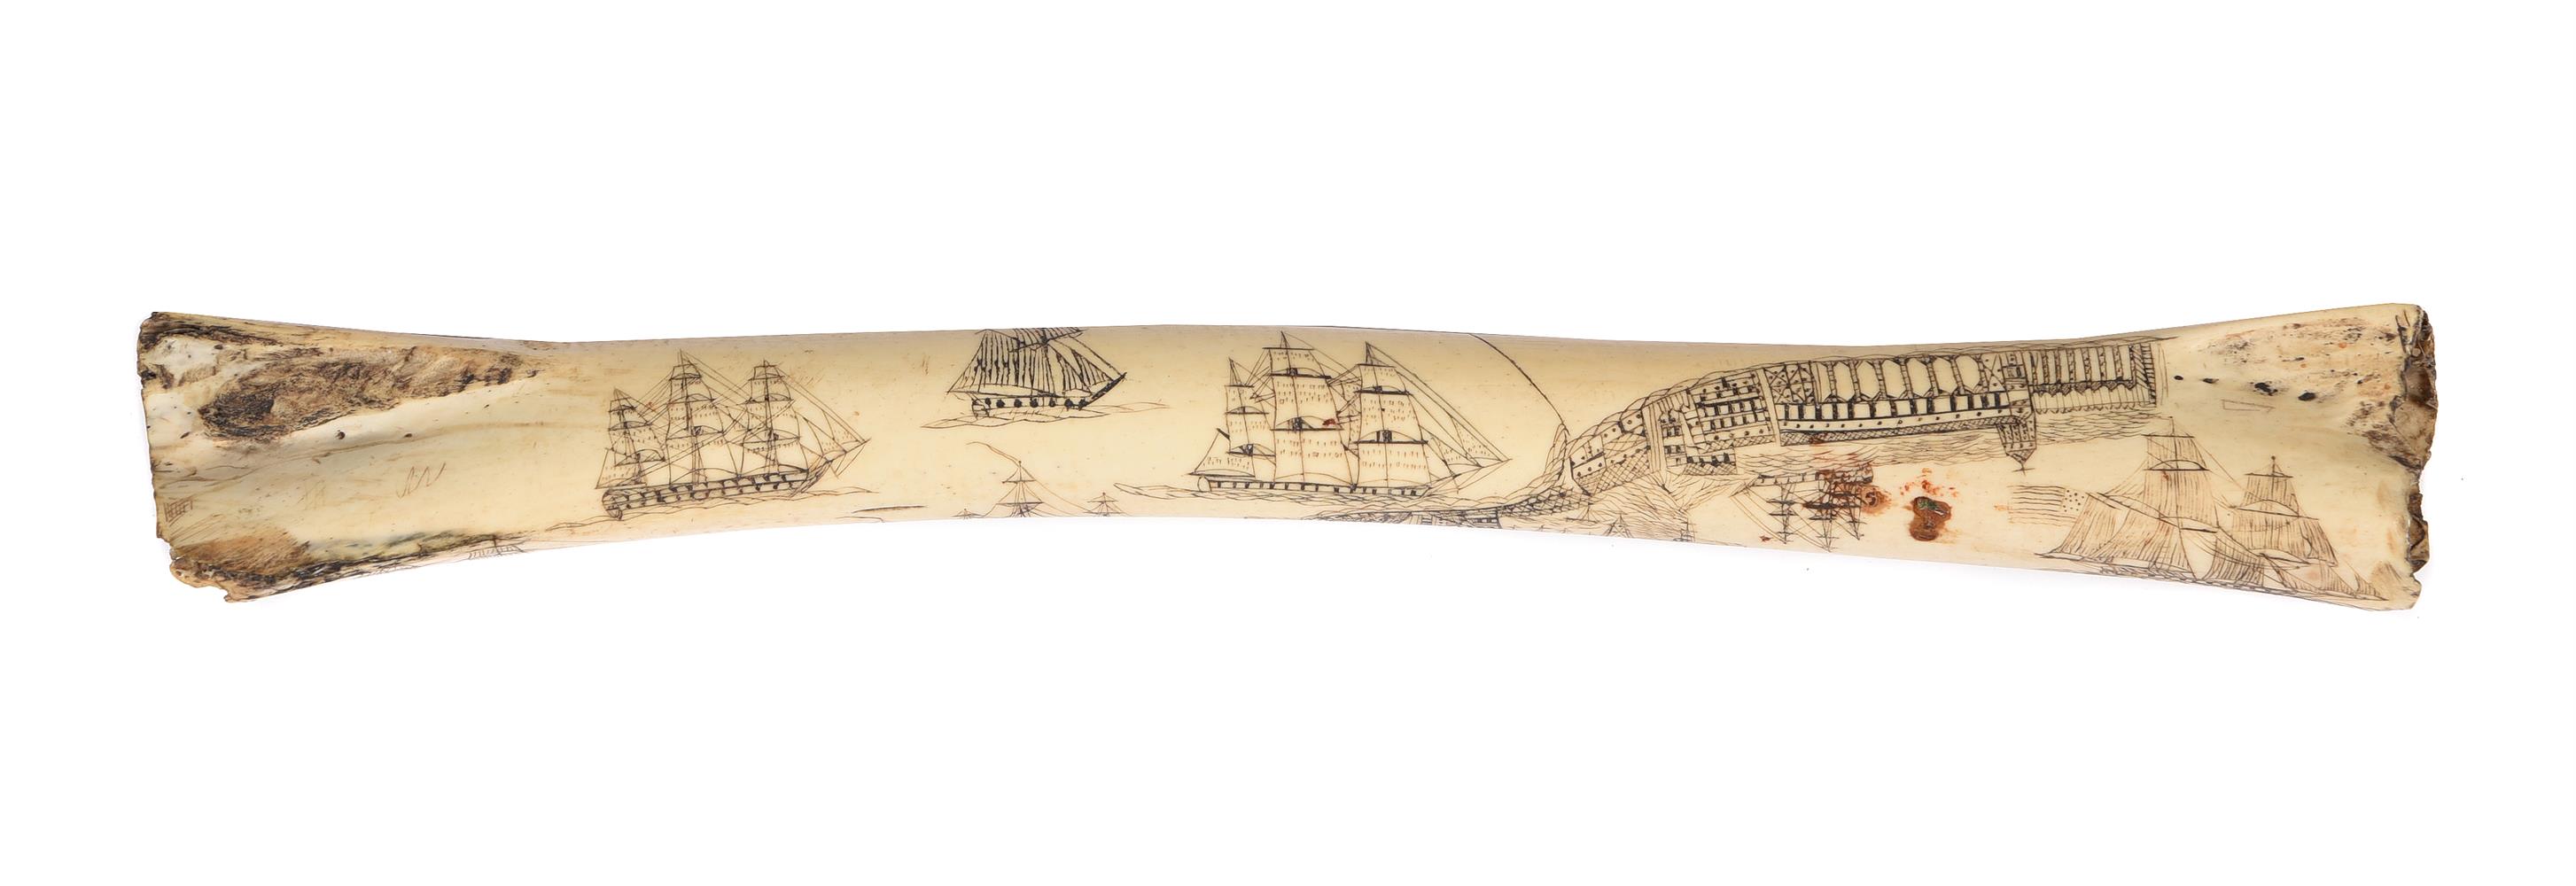 A MARINE SCRIMSHAW DECORATED BONE POSSIBLY NORTH EUROPEAN OR TURKISH - Image 2 of 2